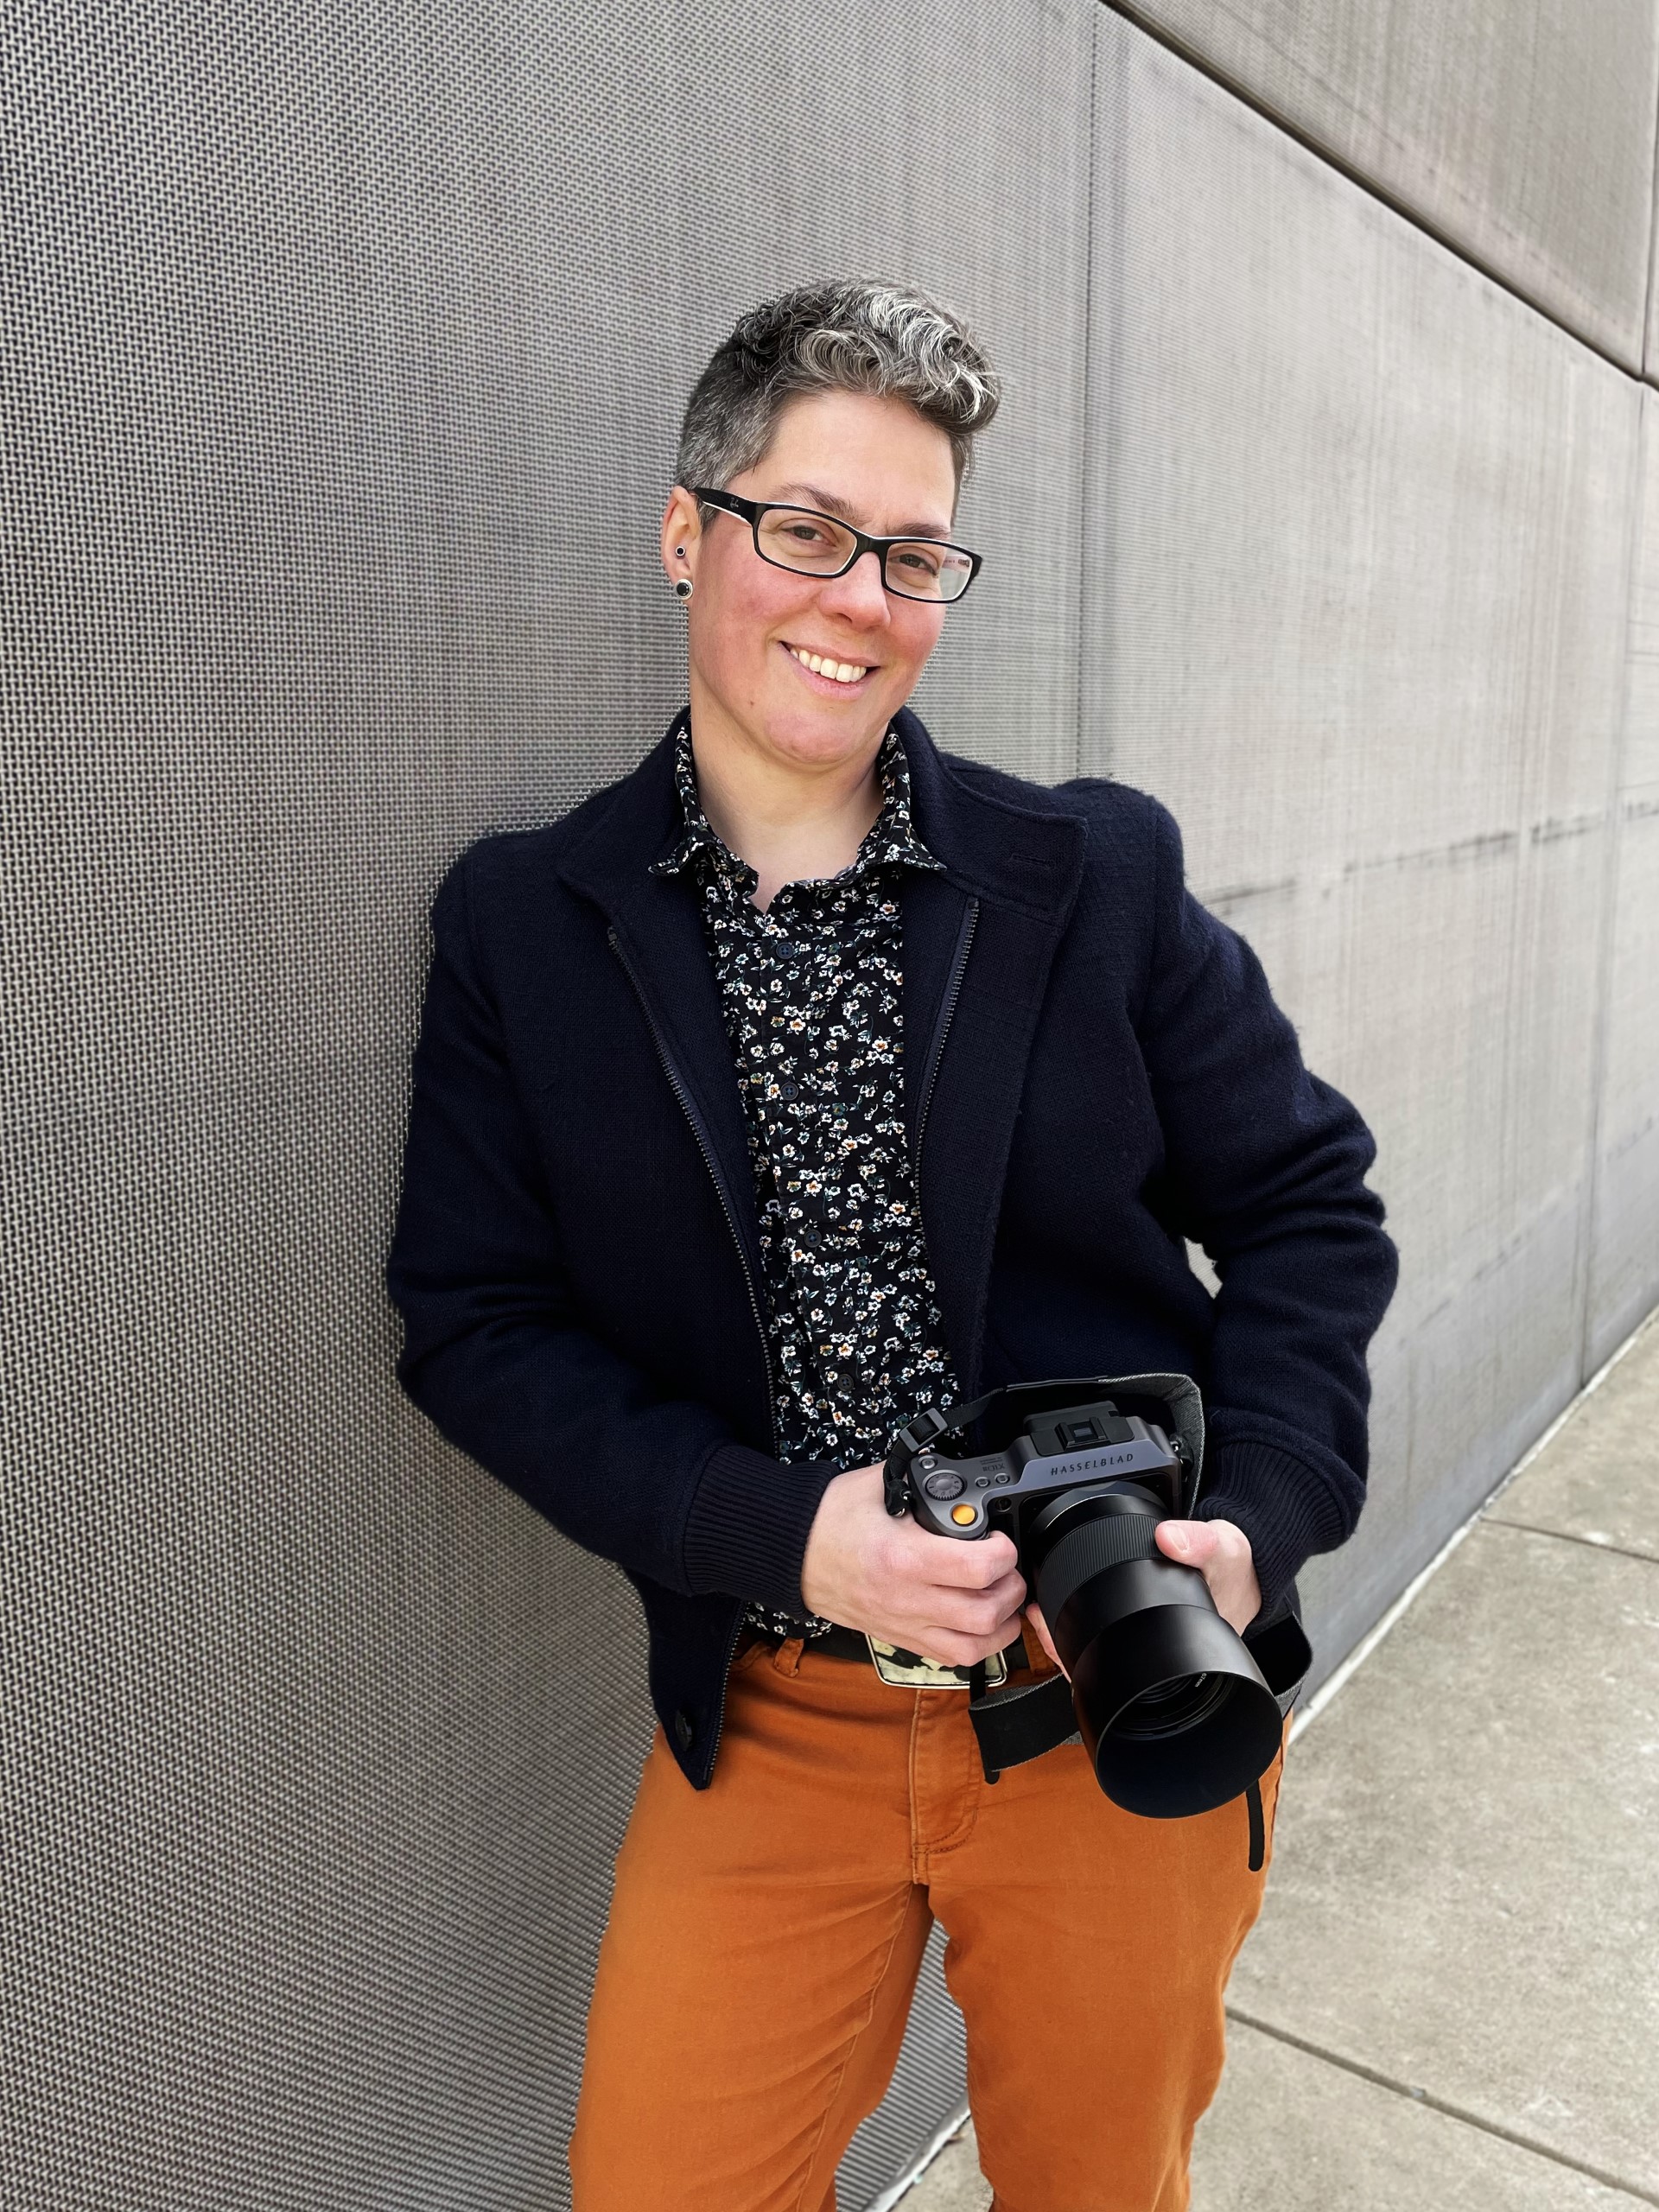 Photo of Jess T. Dugan with a black blazer, dark patterned shirt and orange patterns holding a camera along a grey wall